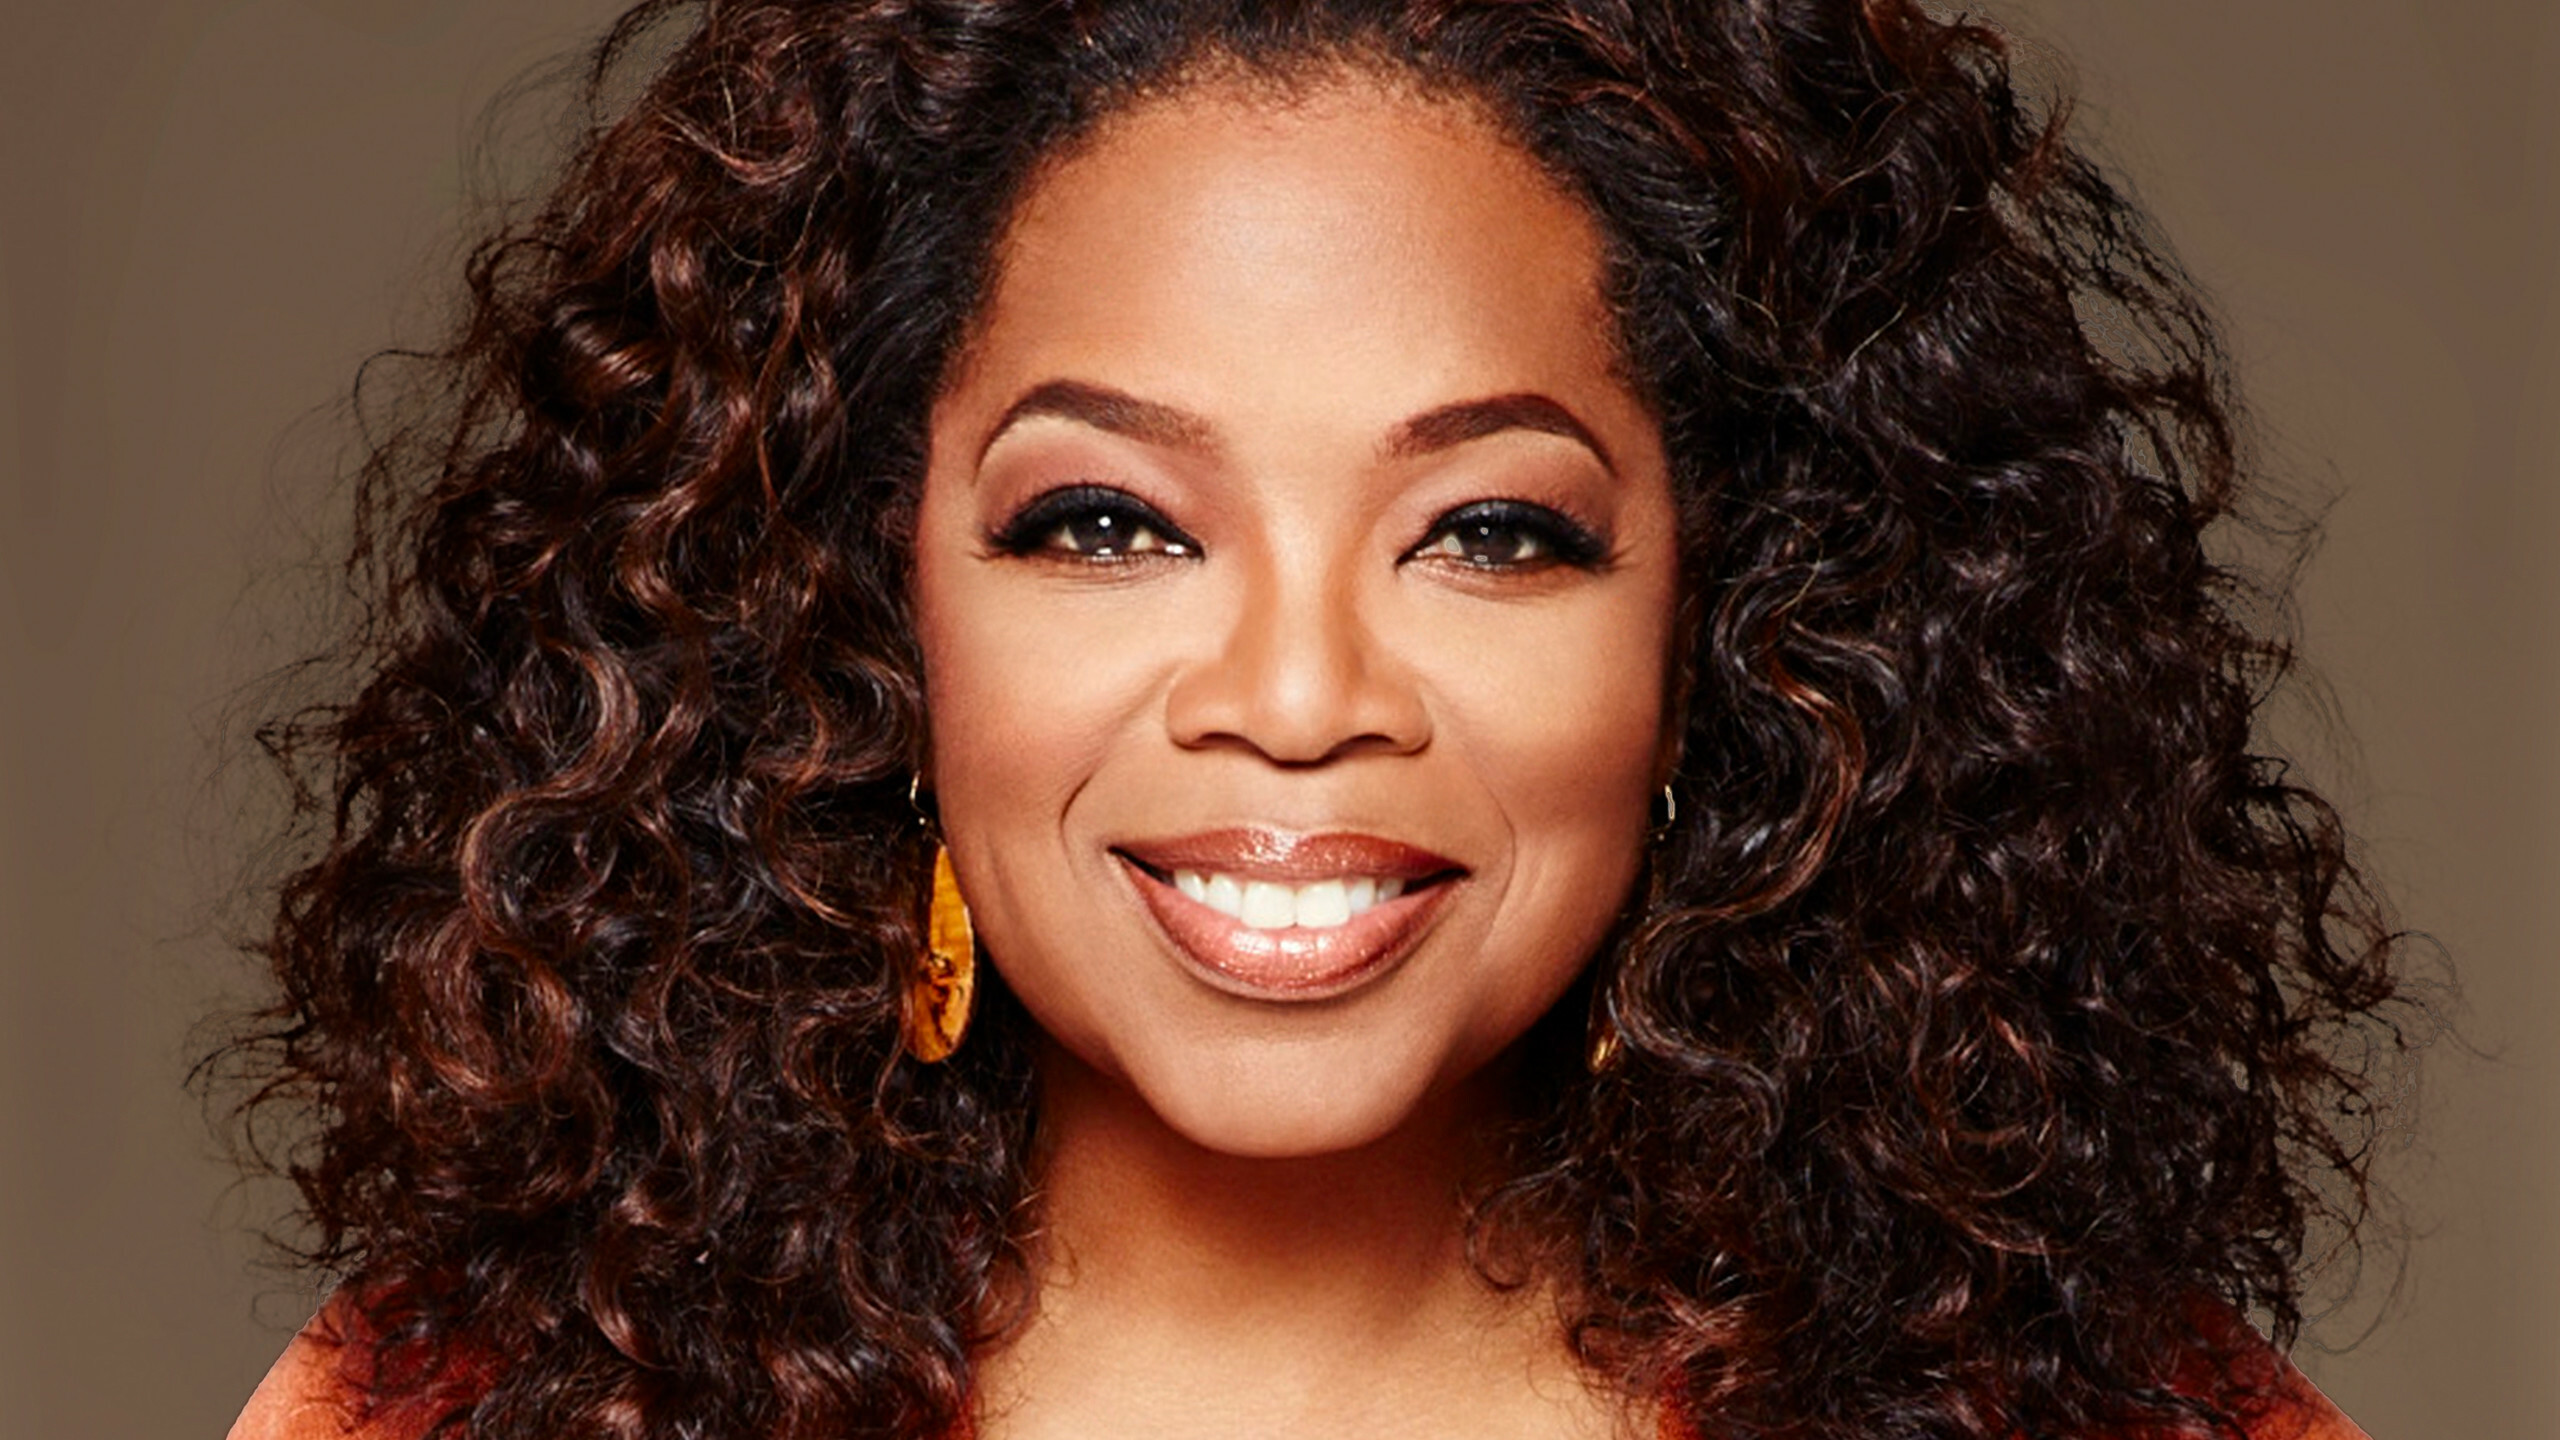 Oprah Winfrey: America's first lady of talk shows, Inducted into the National Women's Hall of Fame, 1994. 2560x1440 HD Background.